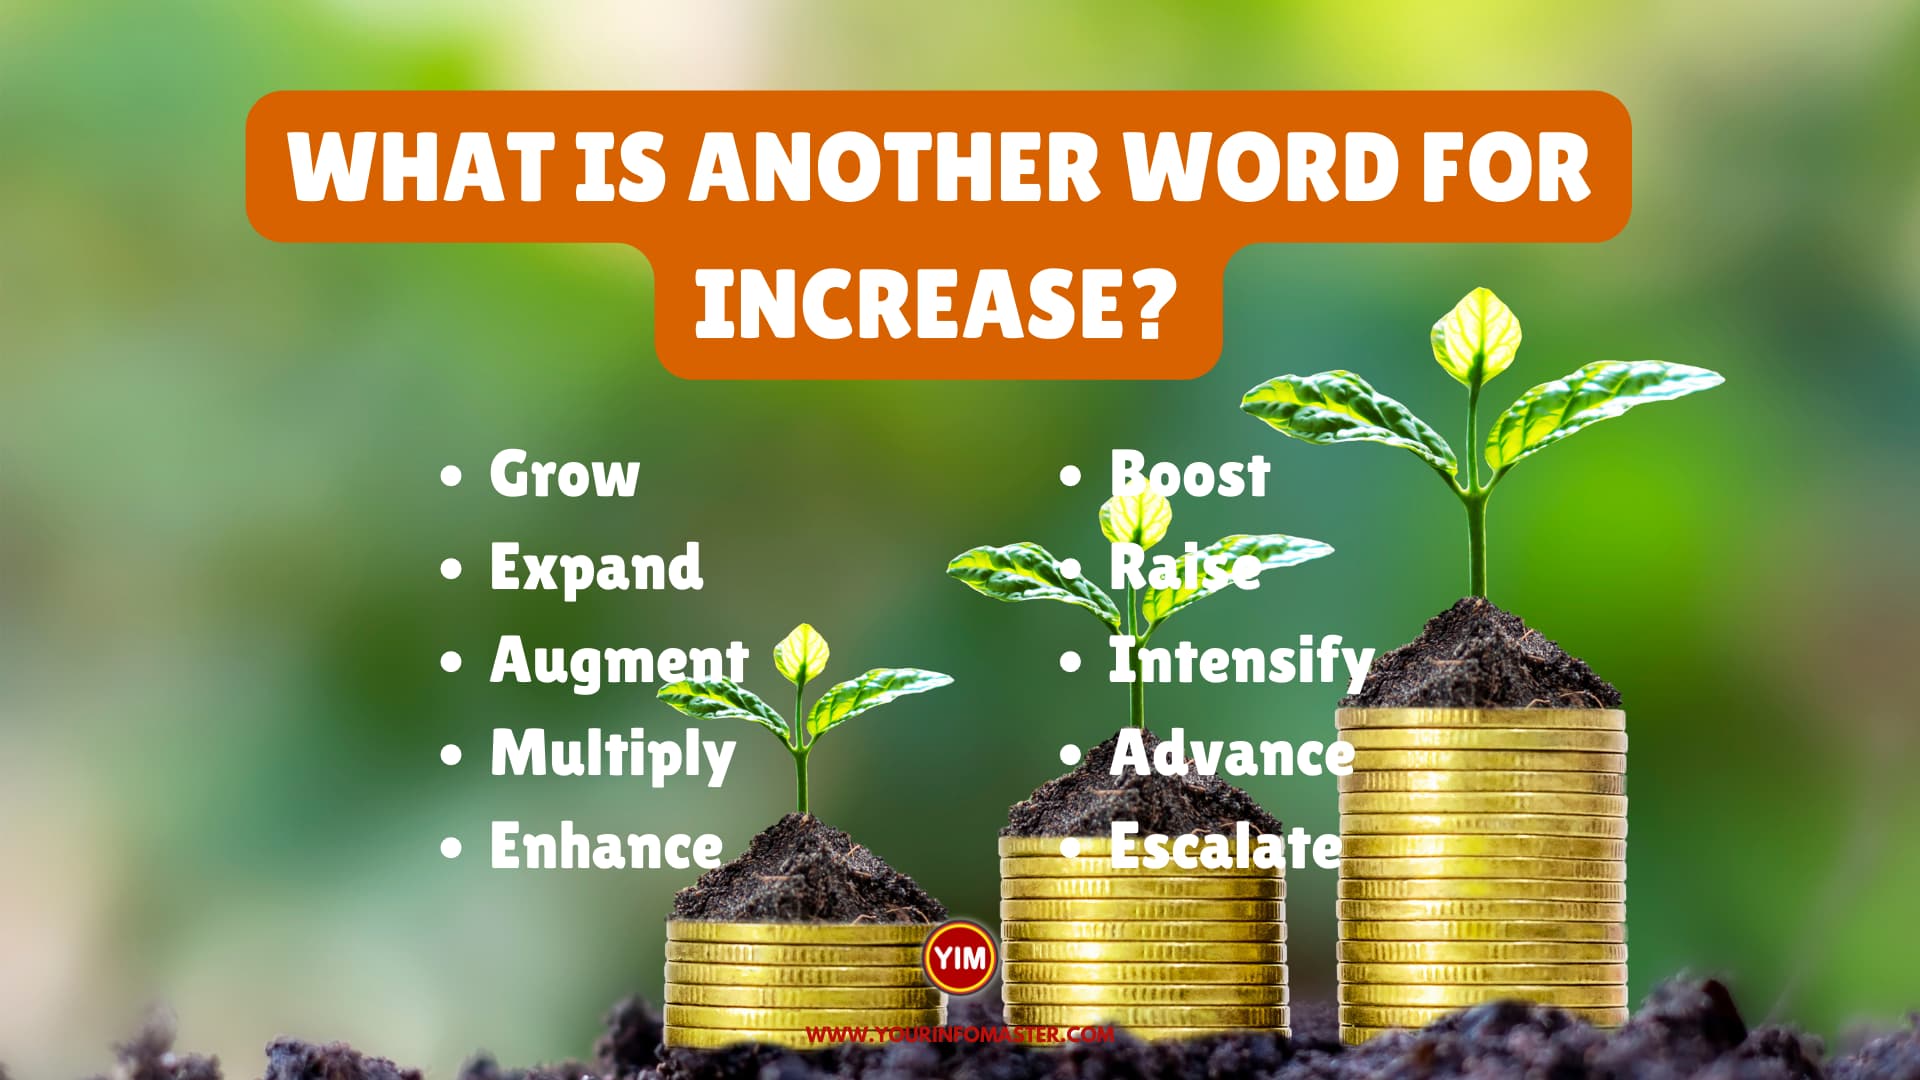 What is another word for Increase